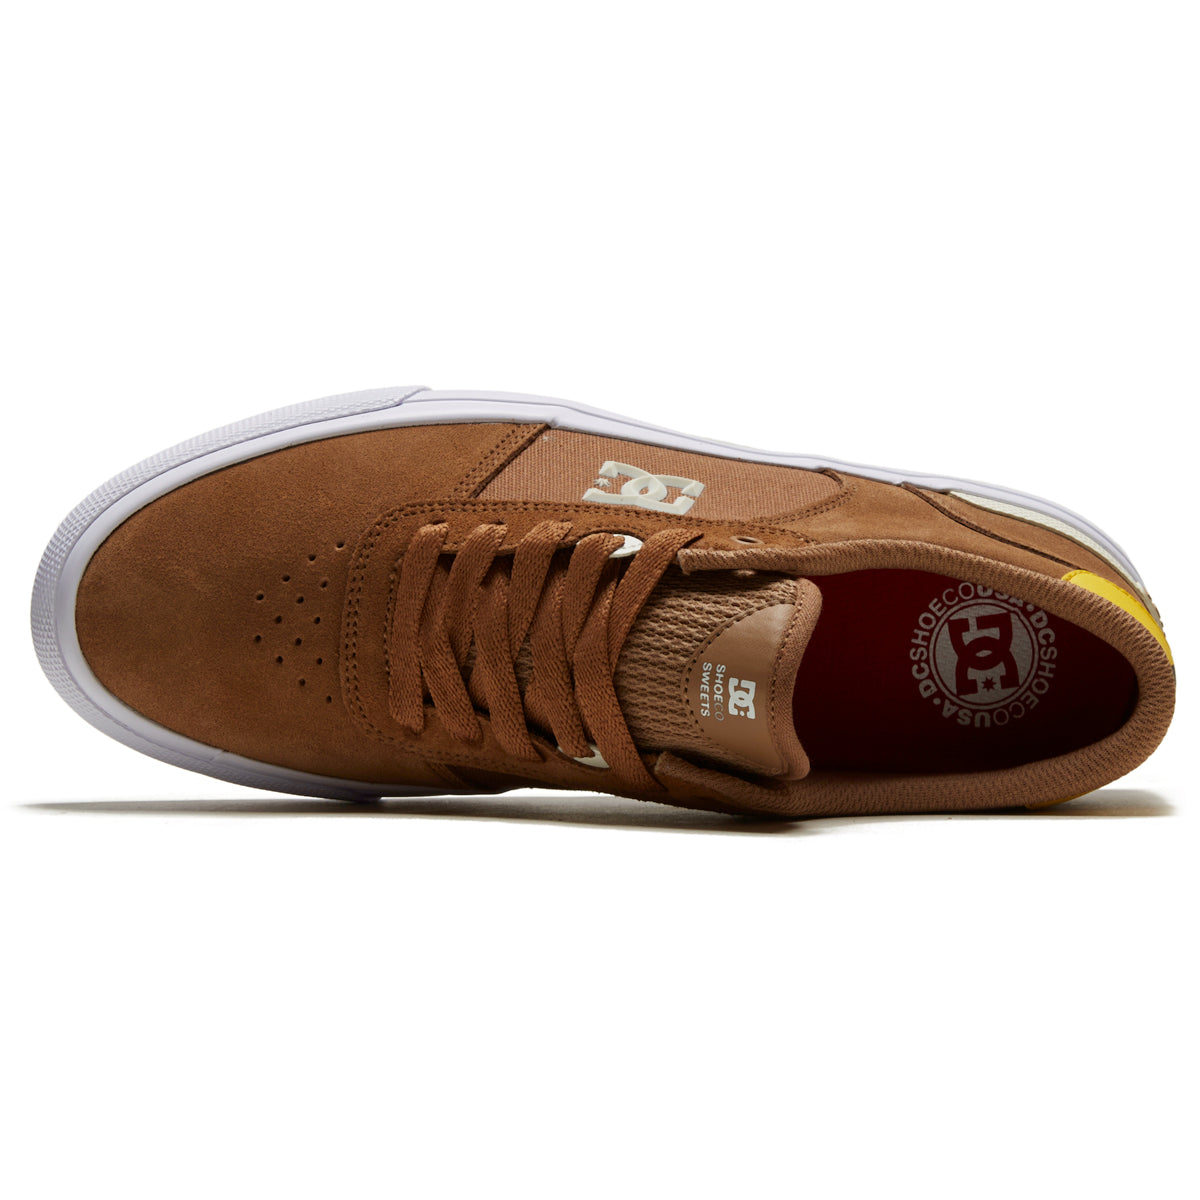 DC Teknic S Shoes - Brown/Yellow image 3